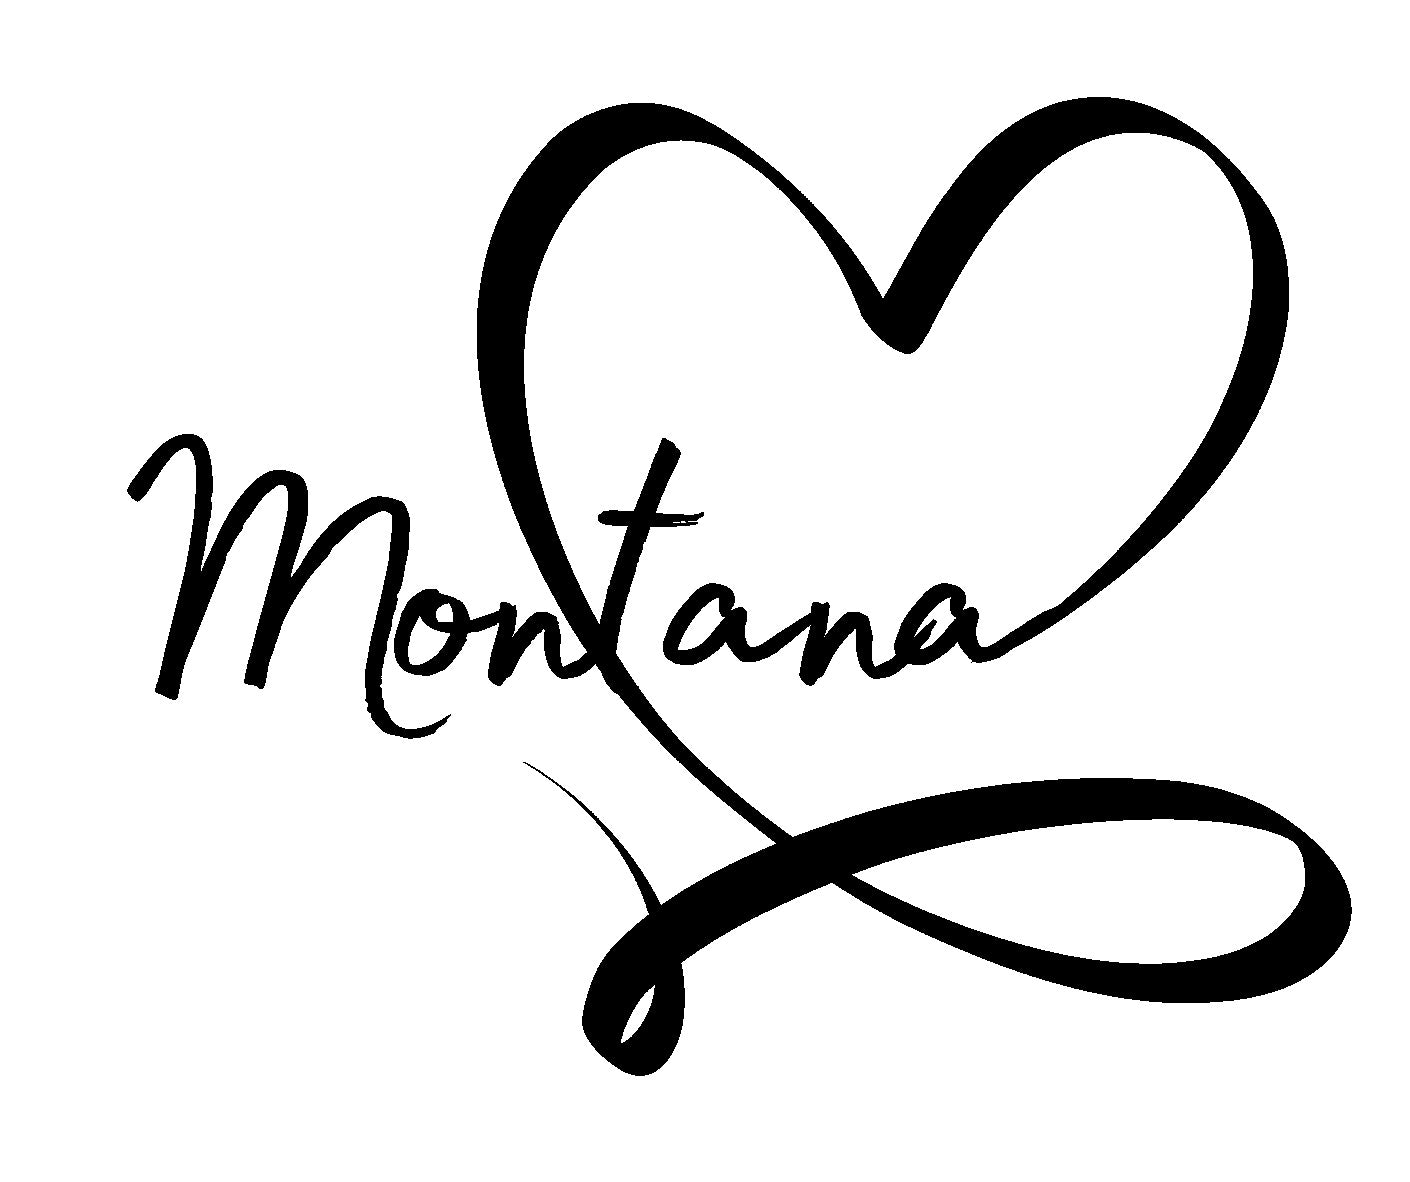 A Montana Love sticker featuring vibrant colors and the state's outline, perfect for personalization or decoration.